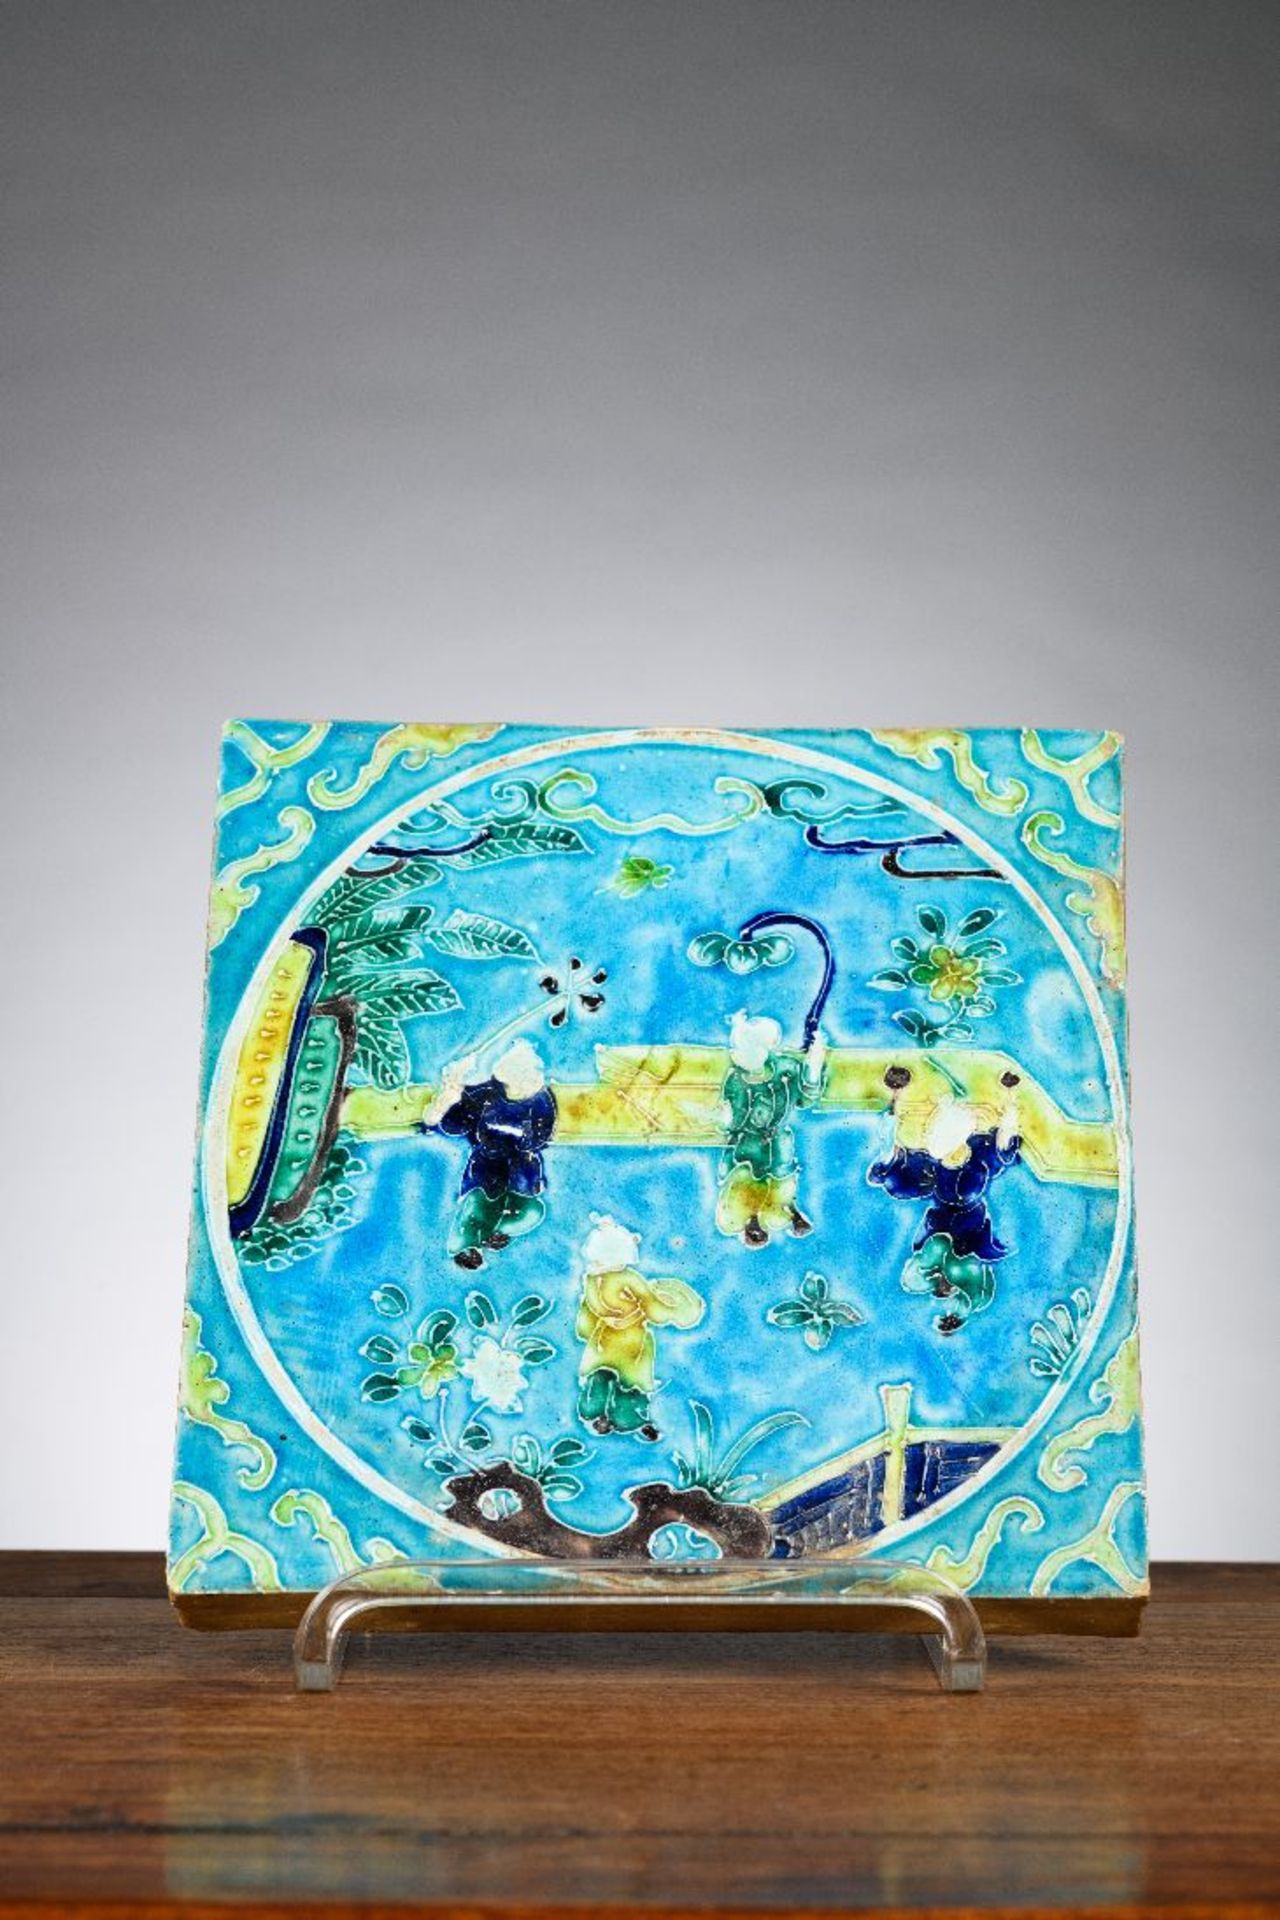 Fahua tile in Chinese porcelain 'children playing'